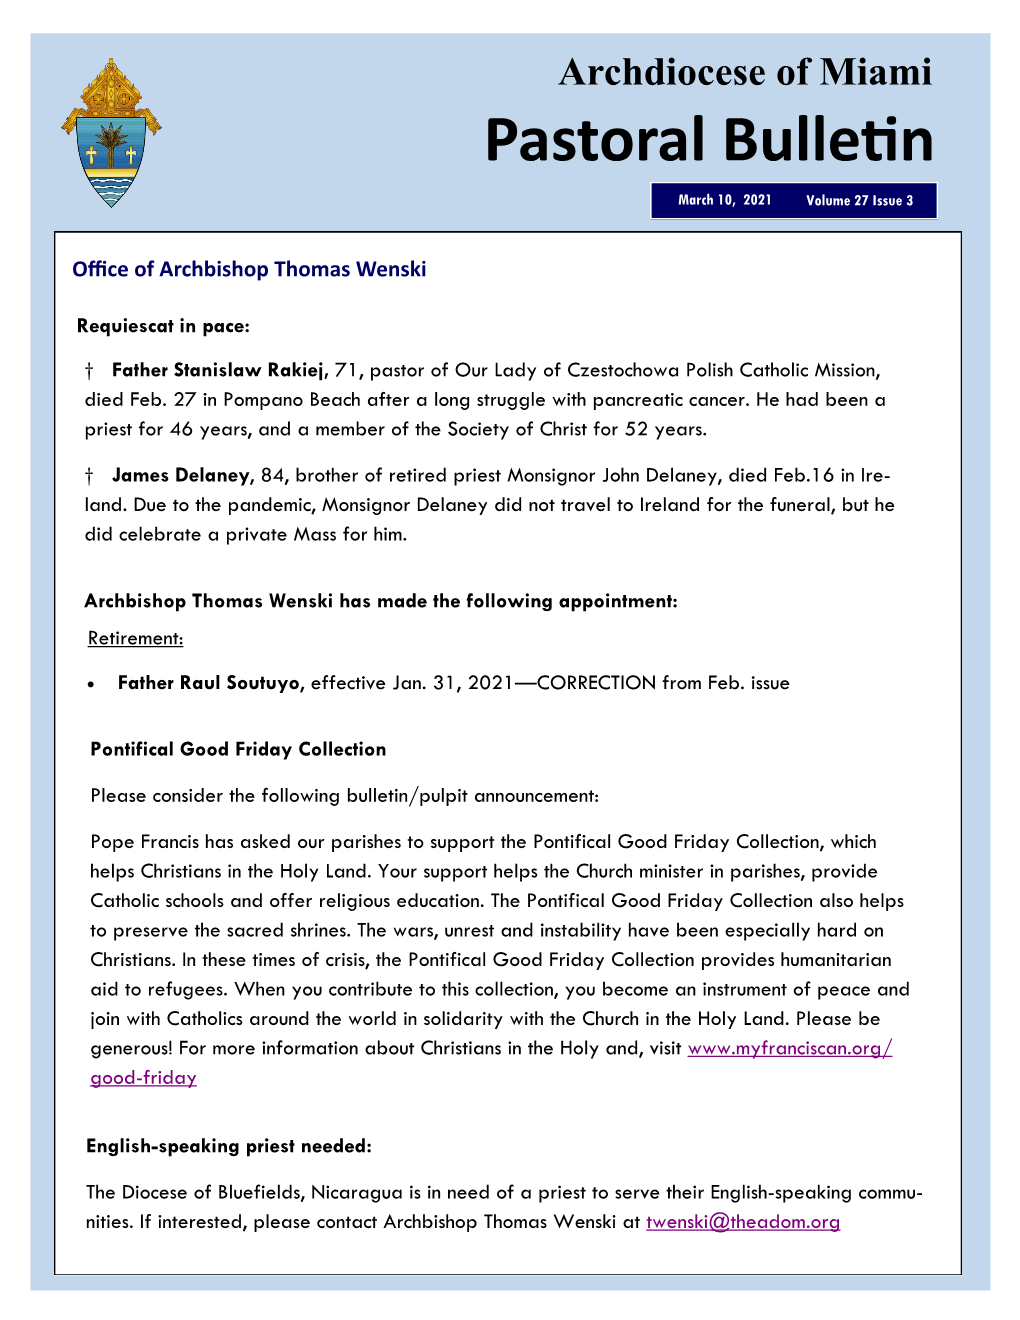 Pastoral Bulletin Archdiocese of Miami